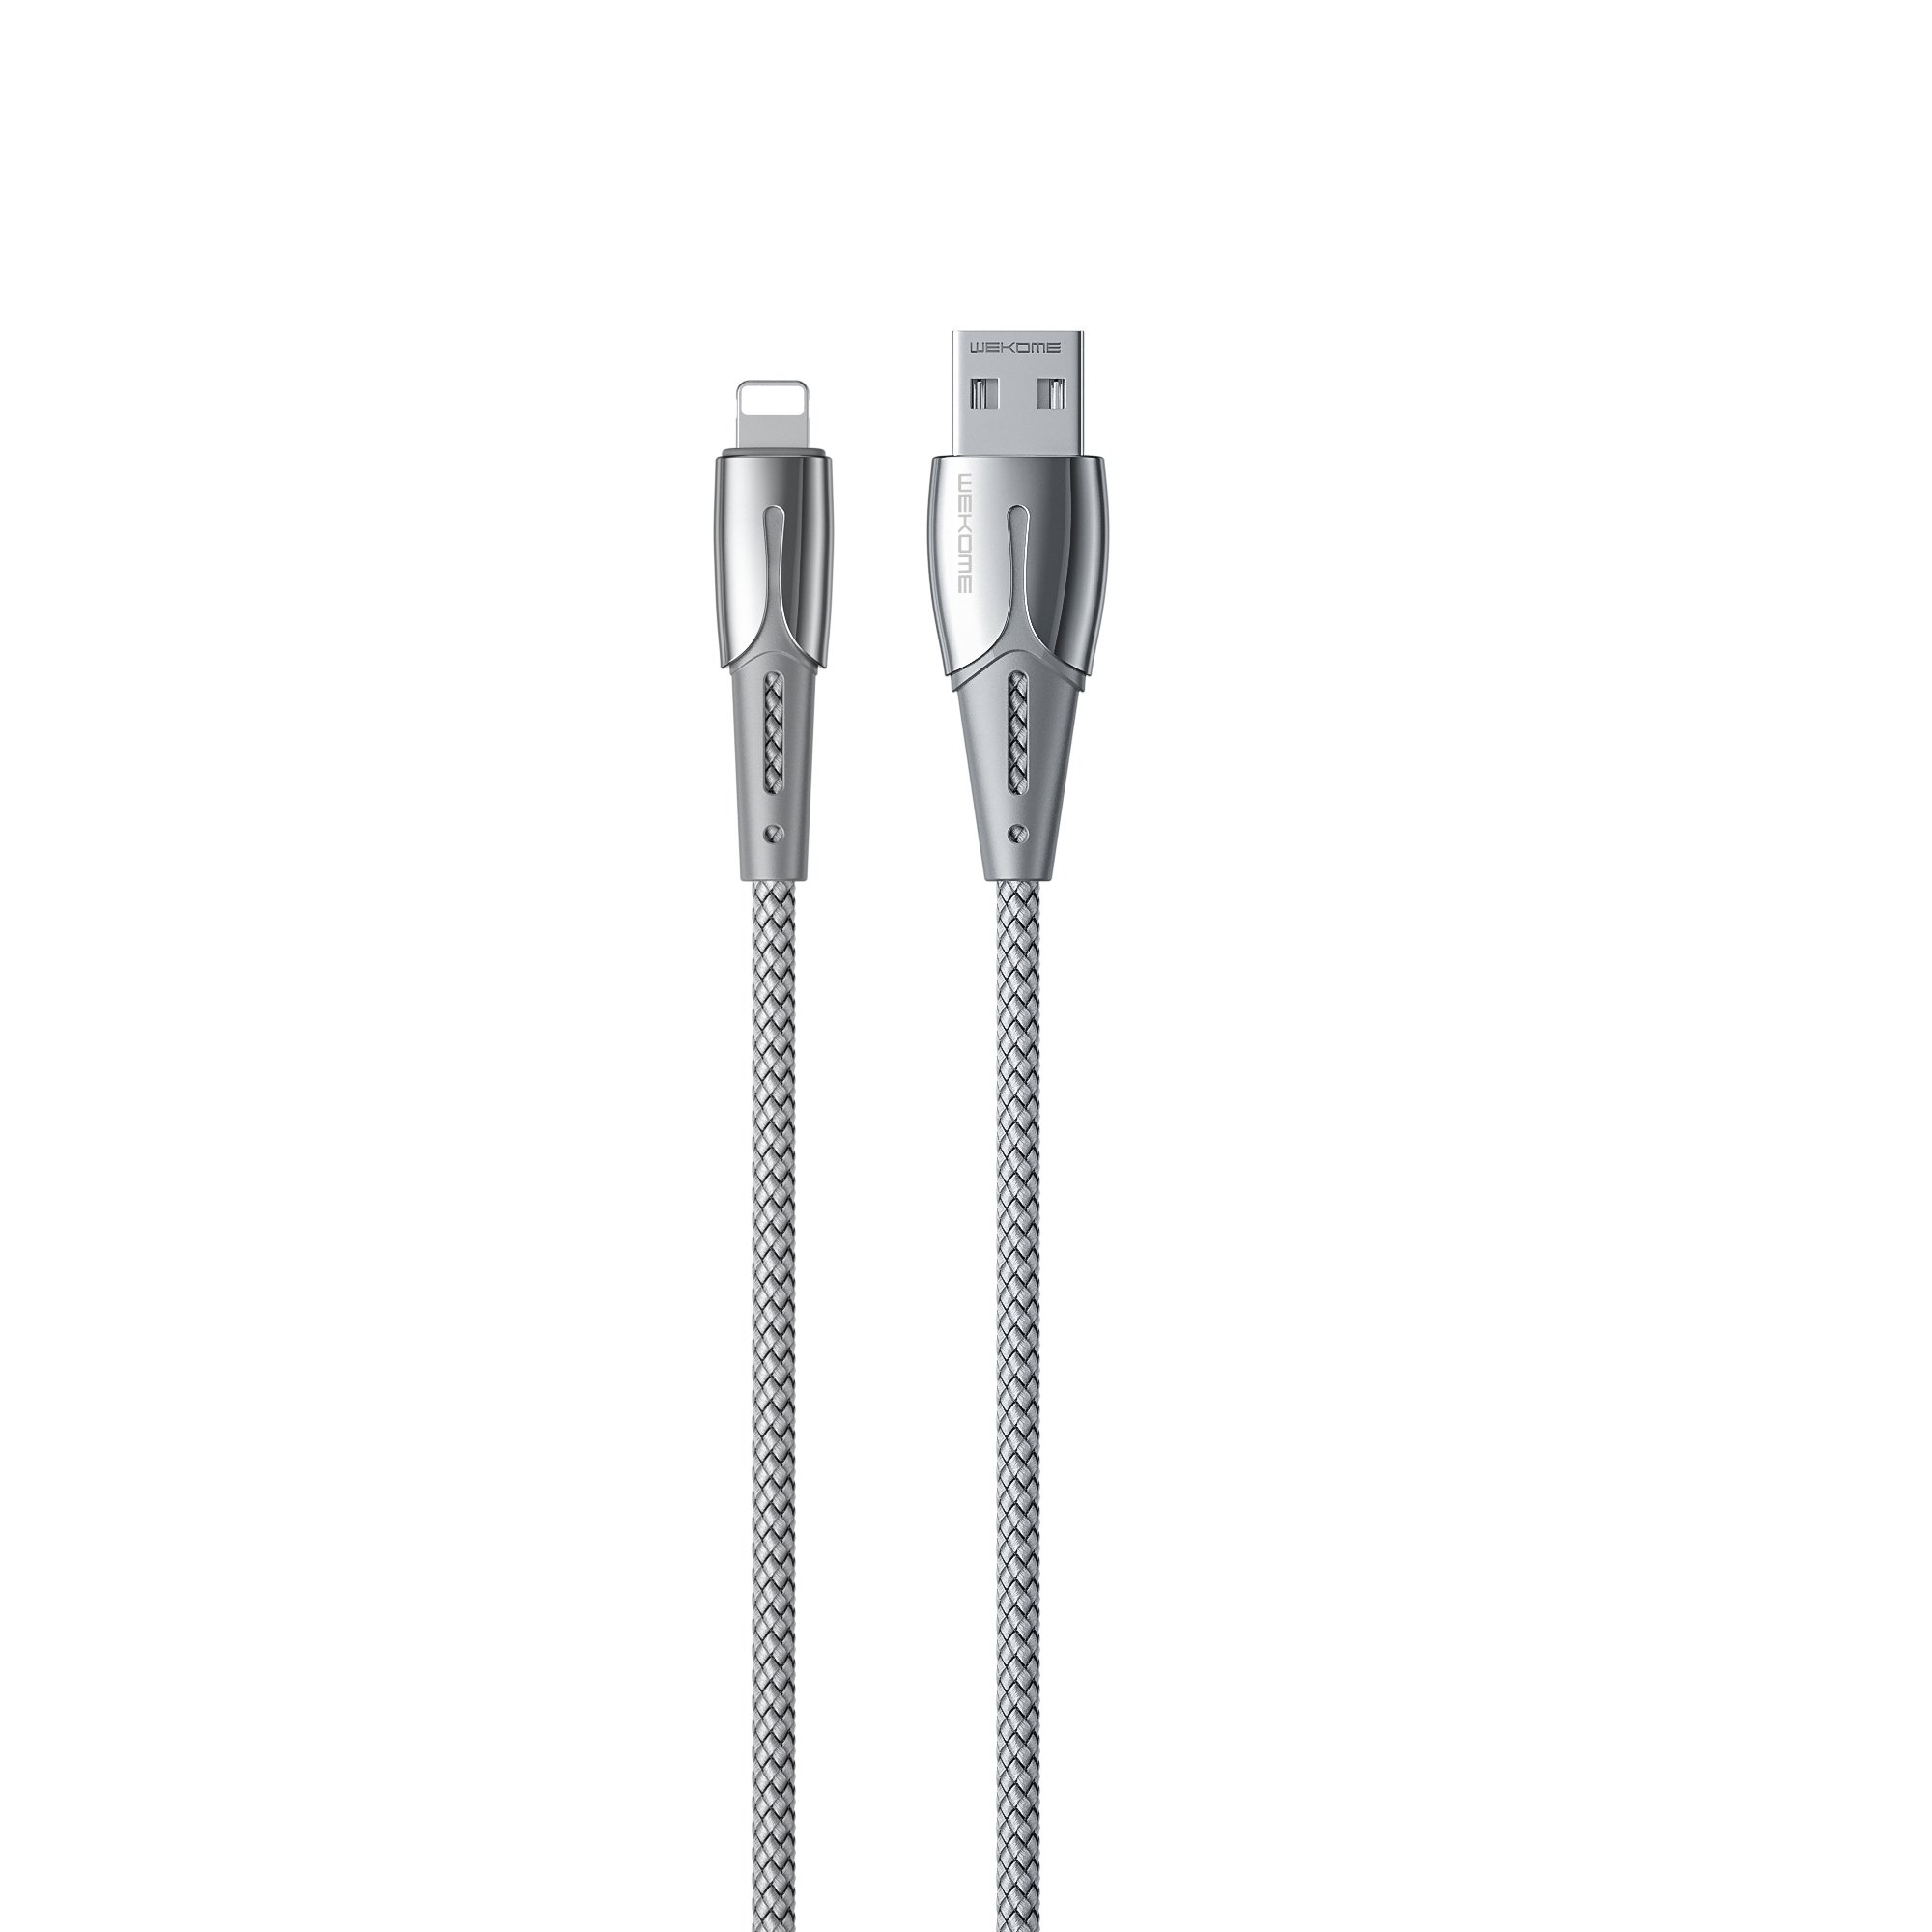 WEKOME Zinc Alloy Fabric Fast Charging Cable